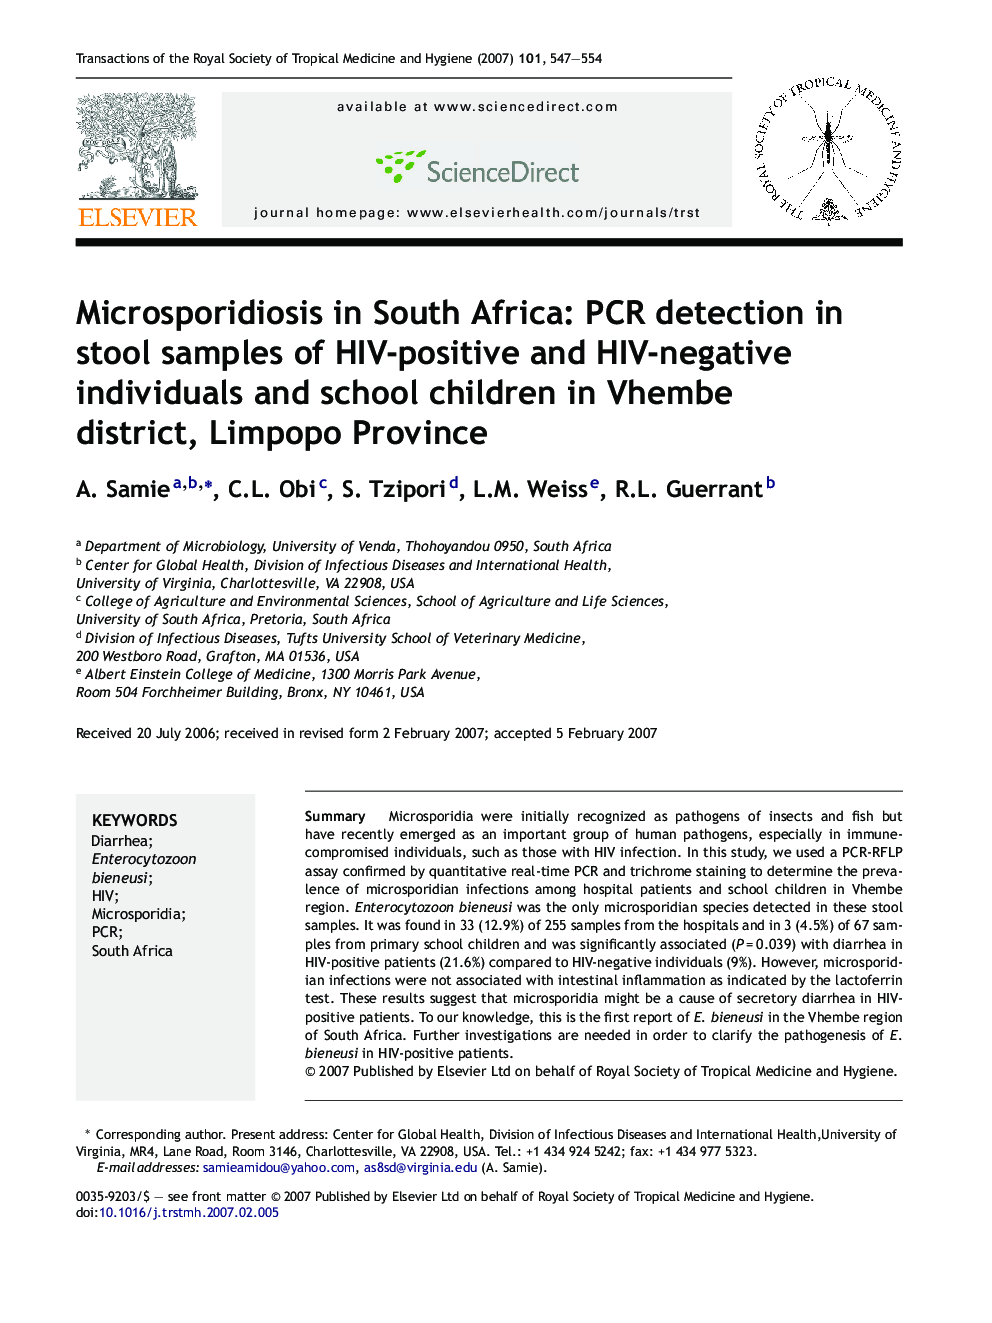 Microsporidiosis in South Africa: PCR detection in stool samples of HIV-positive and HIV-negative individuals and school children in Vhembe district, Limpopo Province